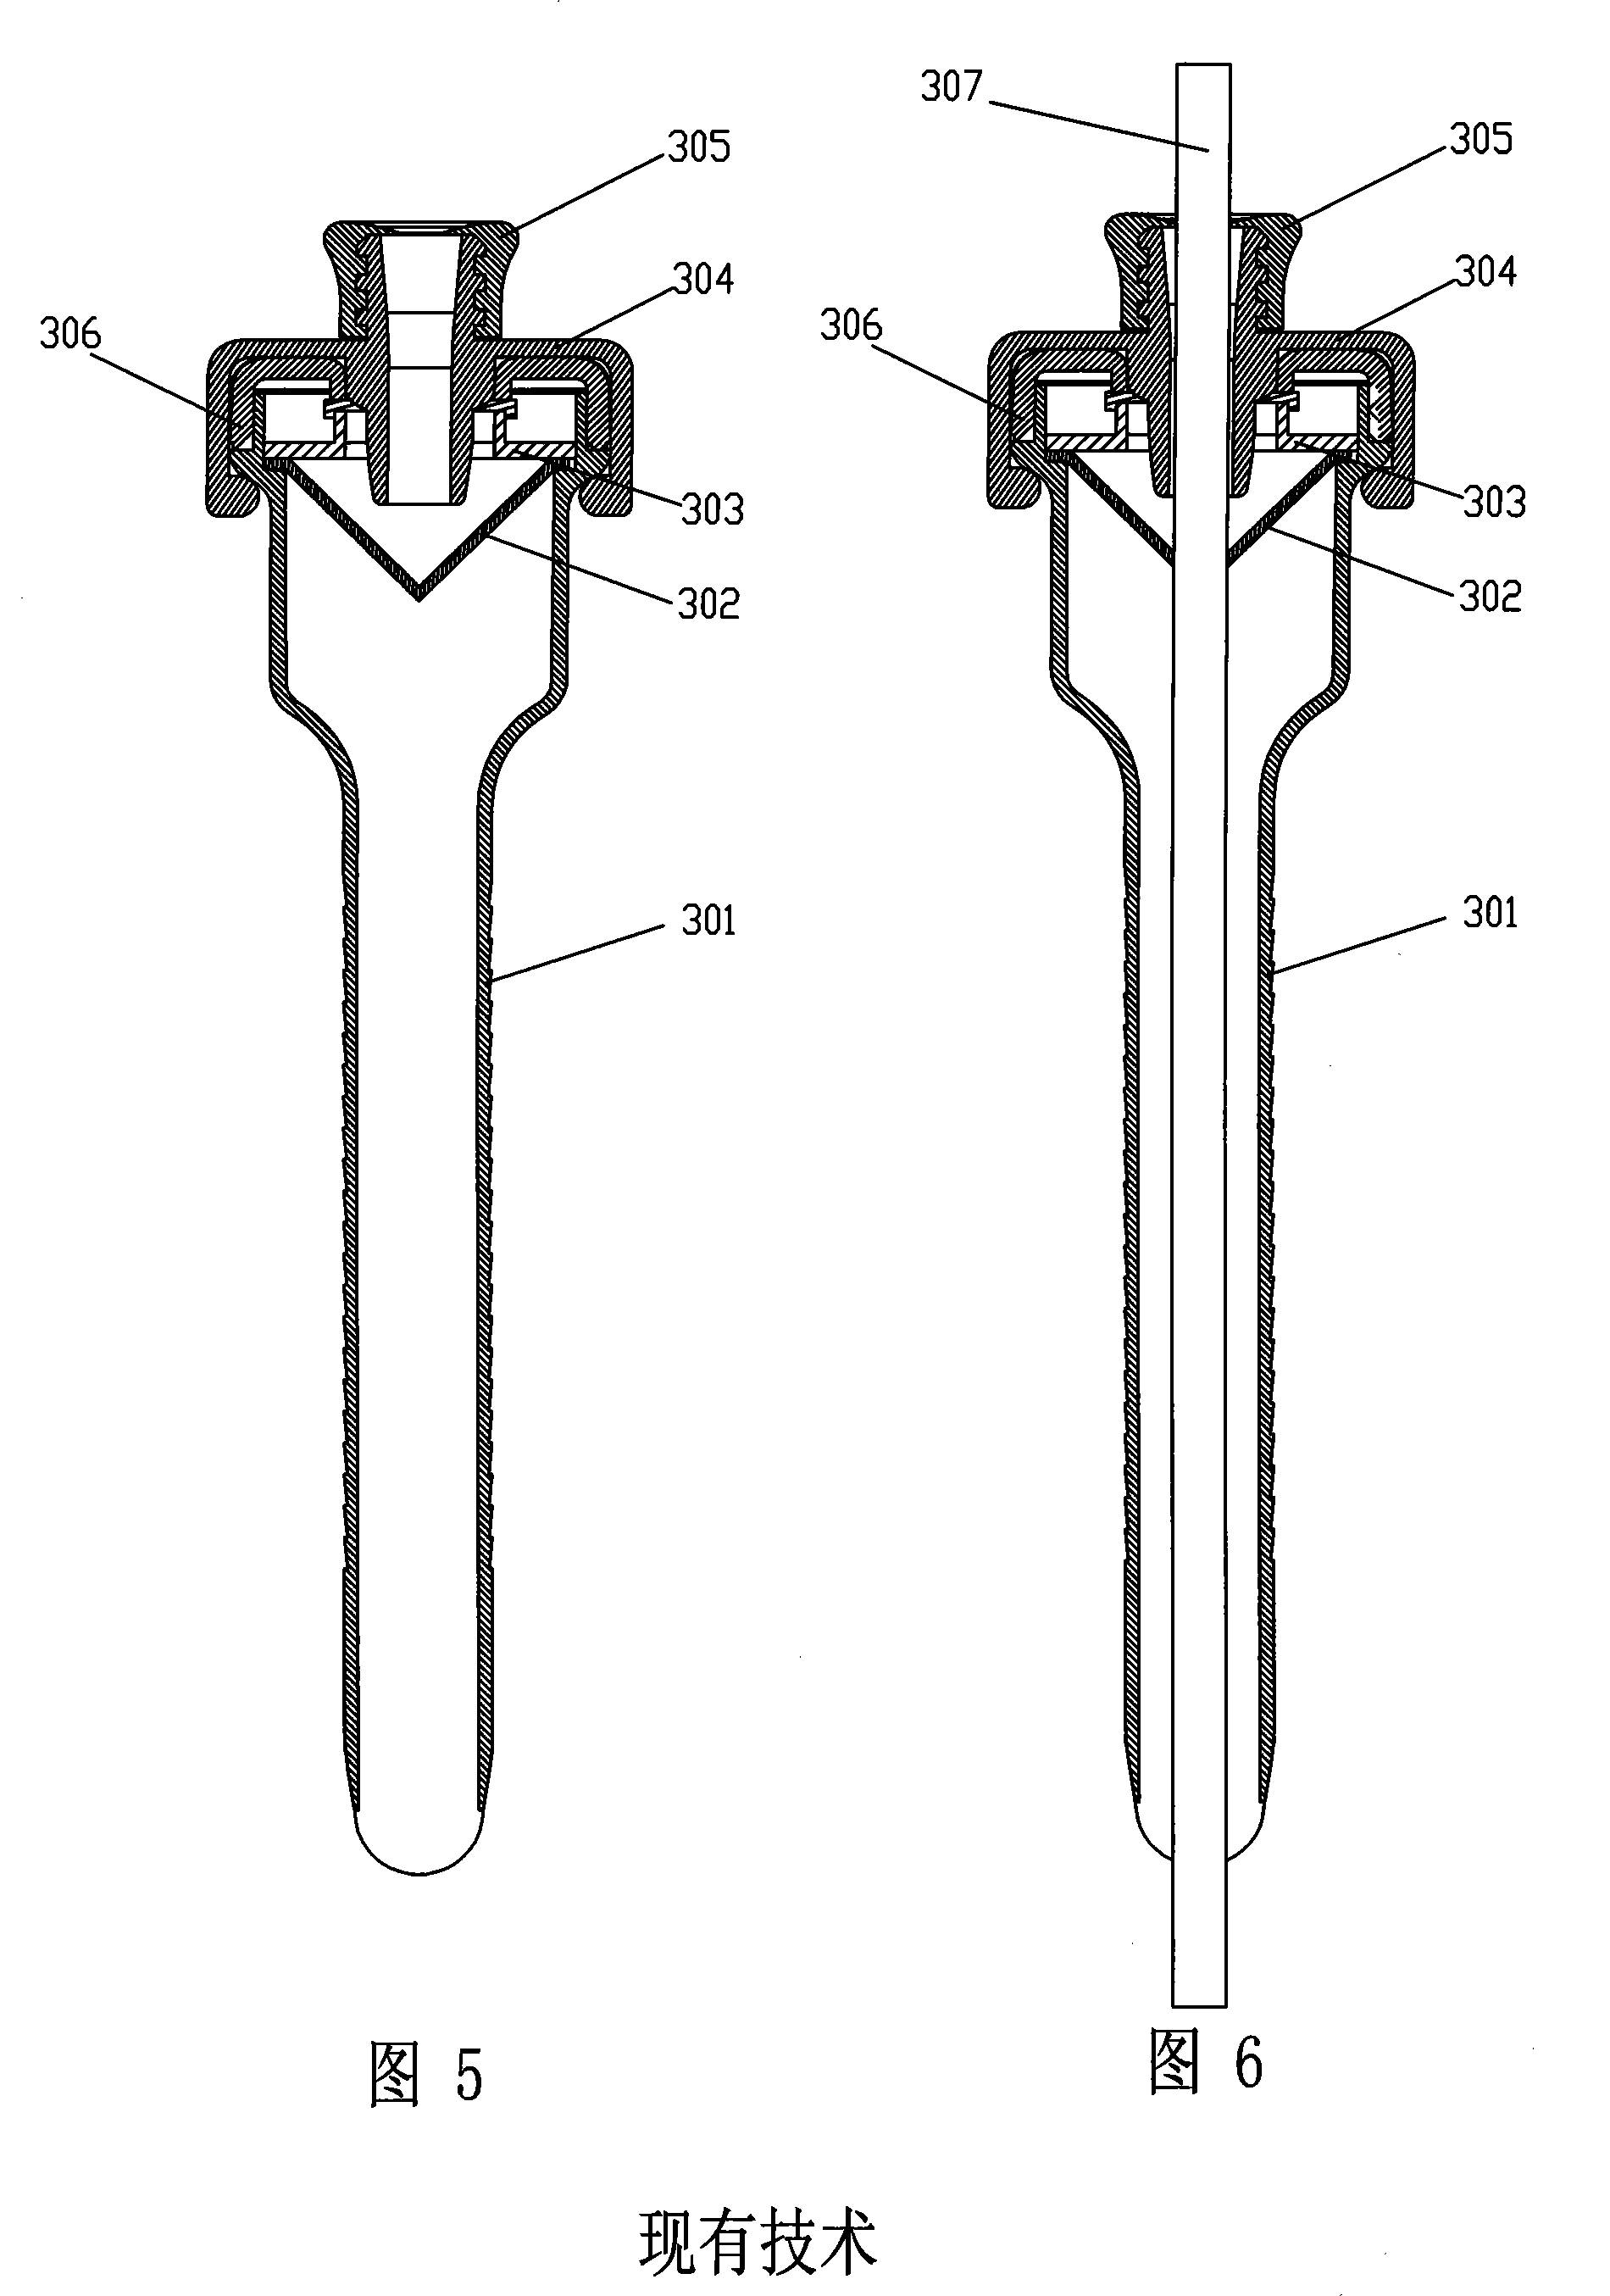 Puncture device general purpose type radial direction seal ring and puncture device